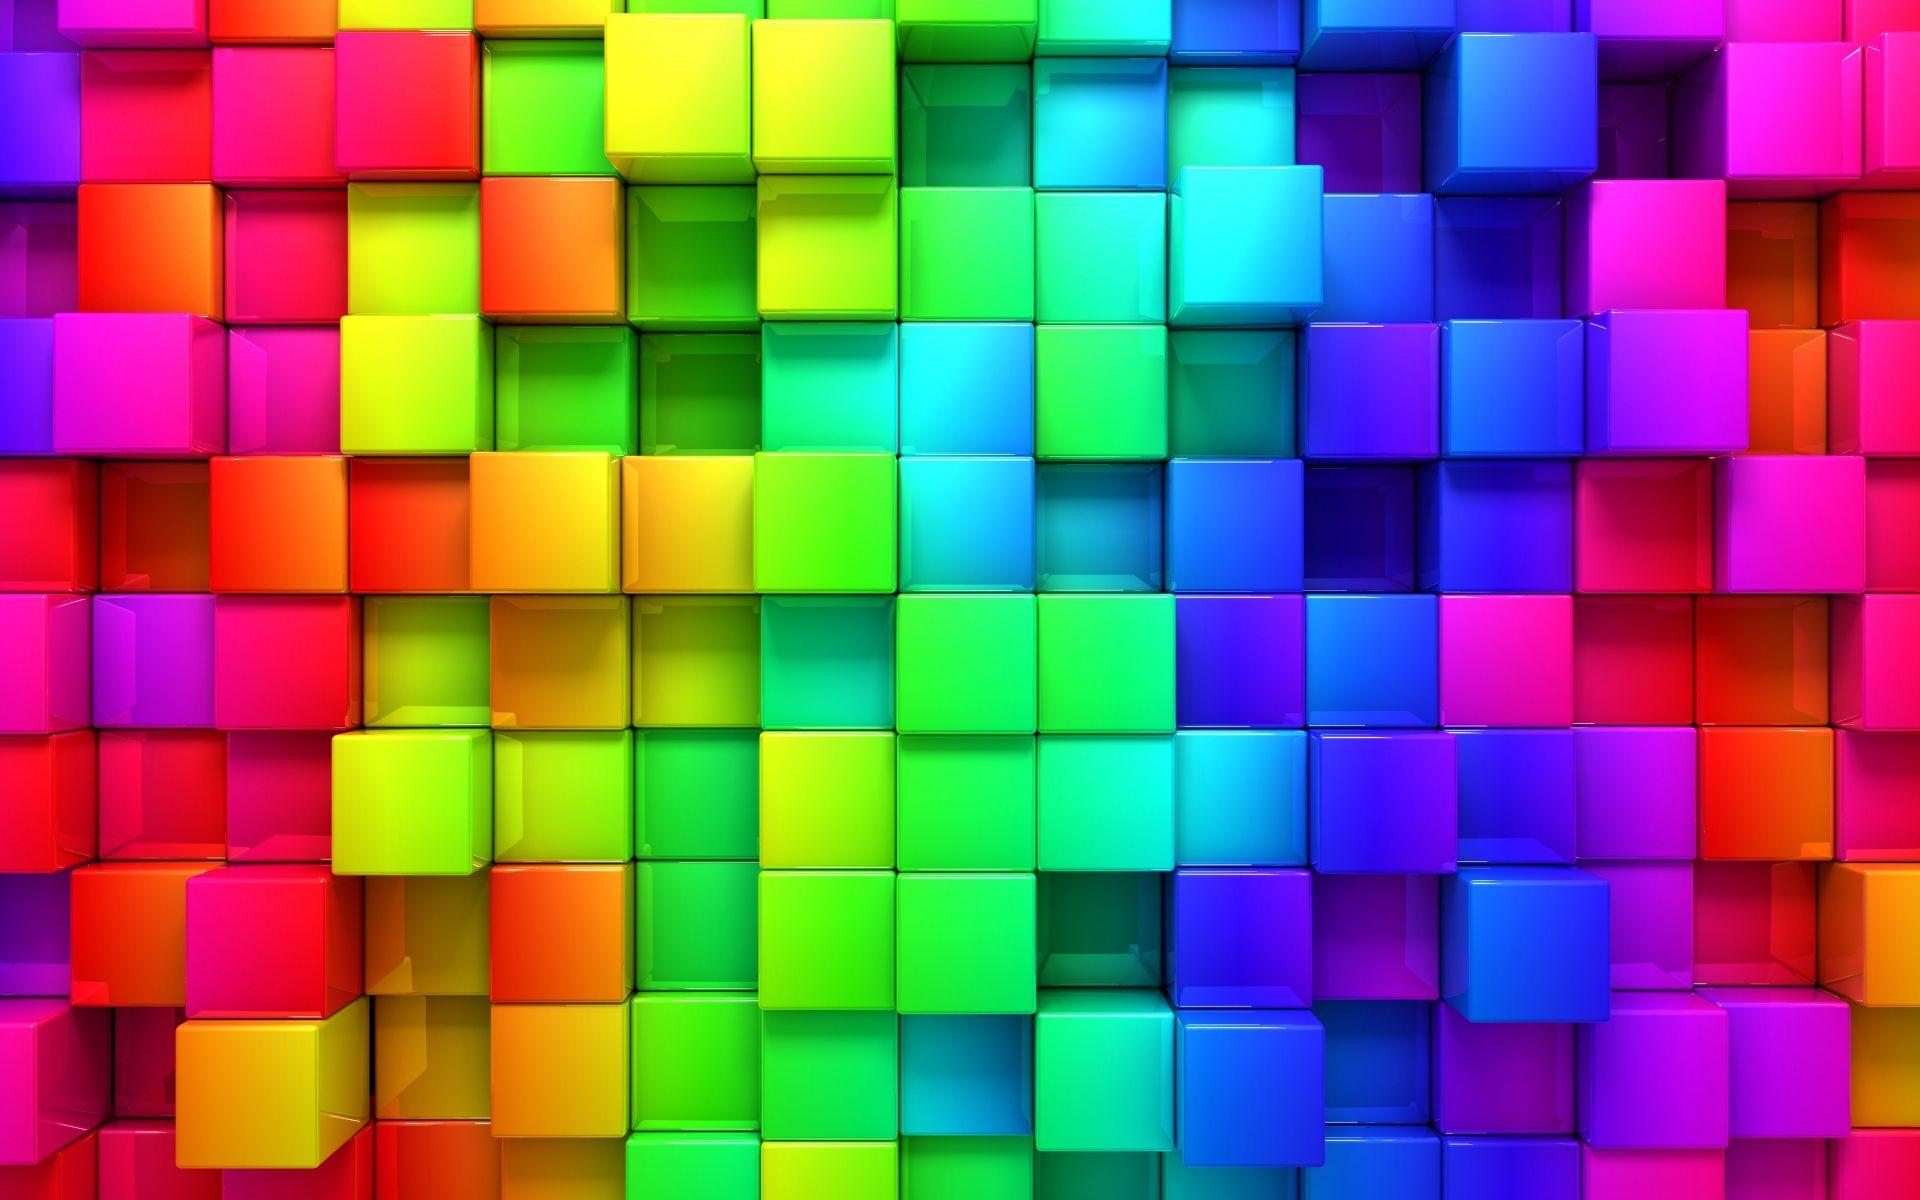 Colorful Wallpaper For Computers Awesome Picture Image idolza